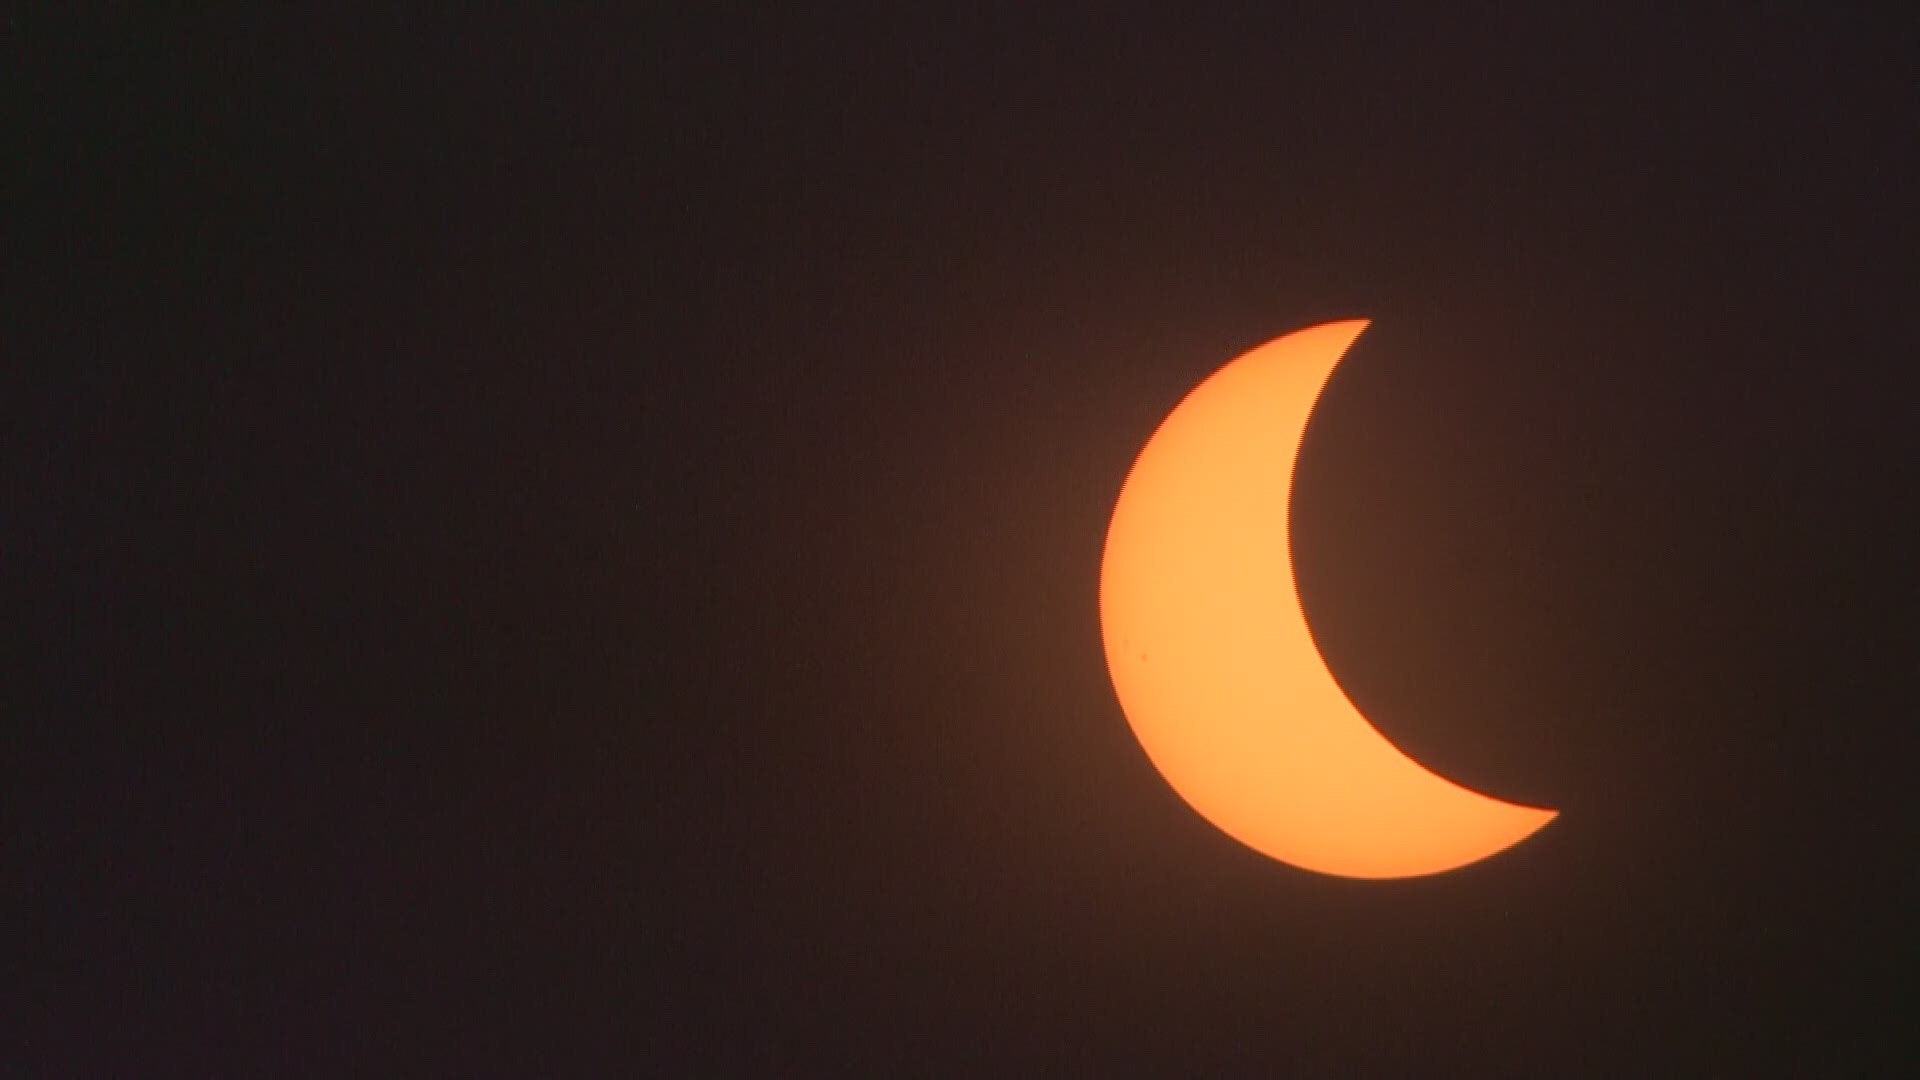 Time-lapse of the total solar eclipse of the sun from Sweetwater, Tenn.